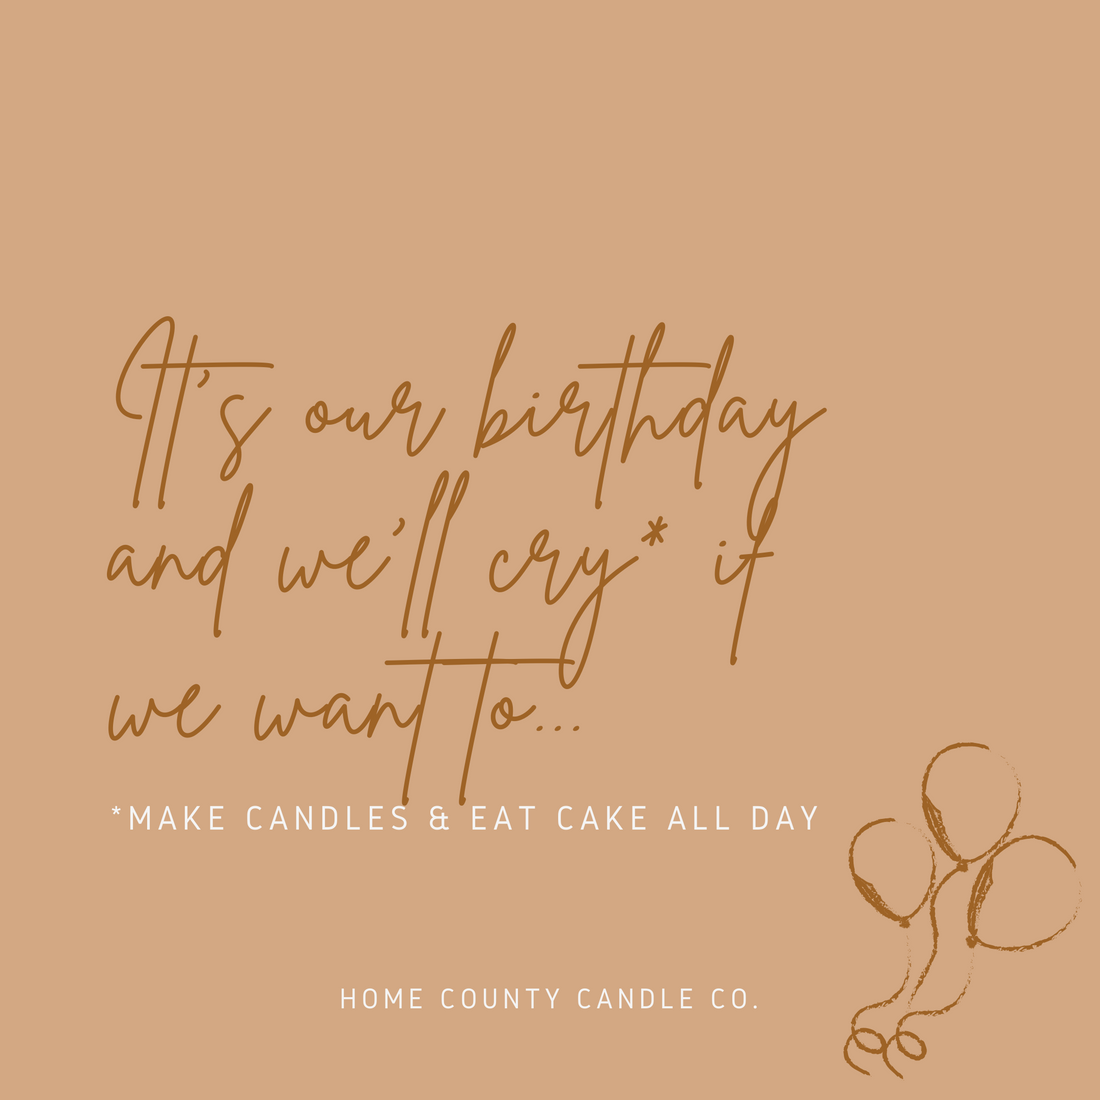 Our 3 favourite moments as we celebrate our 3rd birthday! - Home County Candle Co.